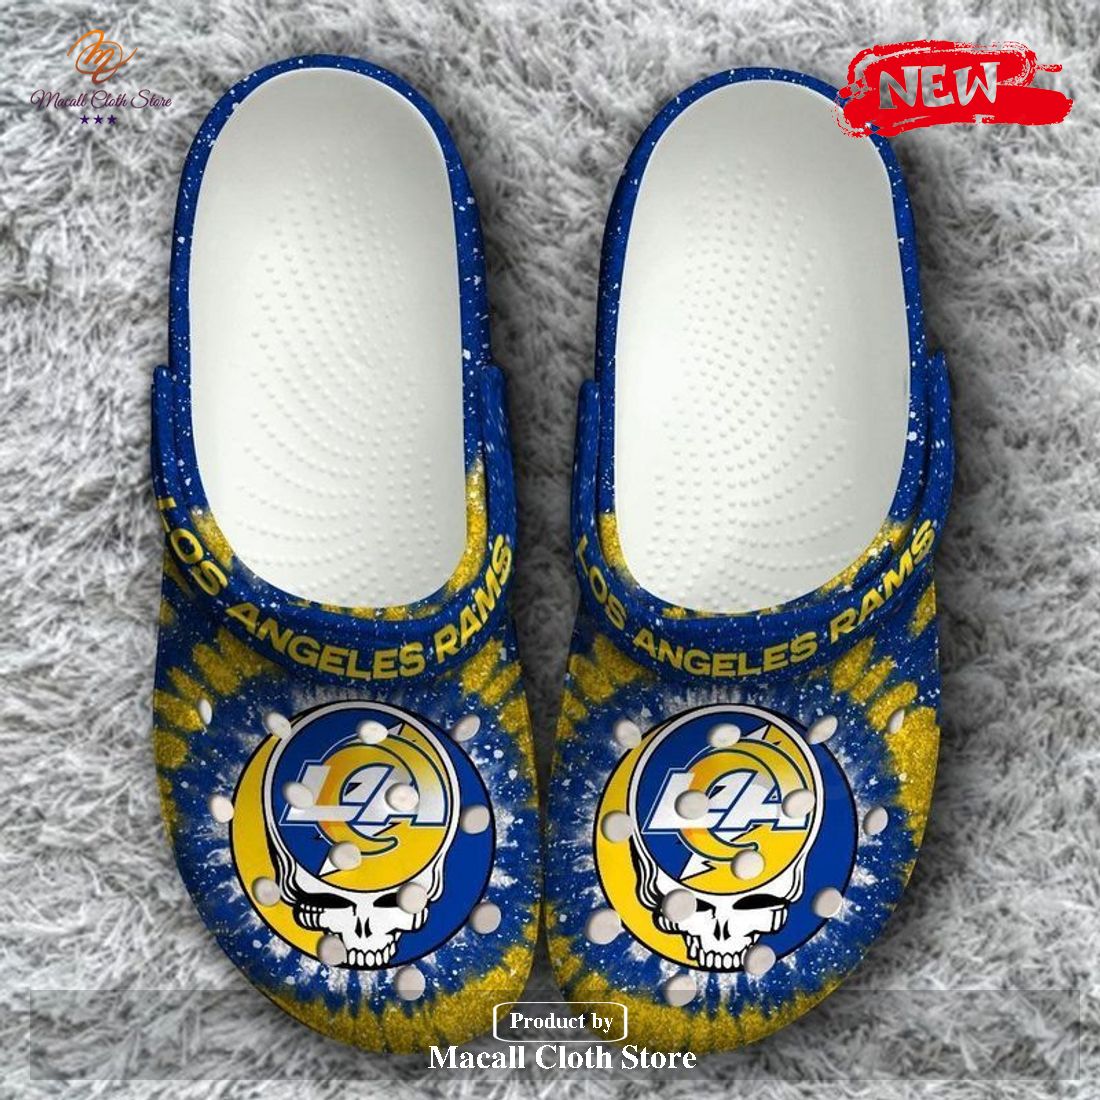 NEW] Los Angeles Rams Grateful Dead Classic Gift For Fan Rubber Crocs  Crocband Clogs Comfy Footwear - Macall Cloth Store - Destination for  fashionistas